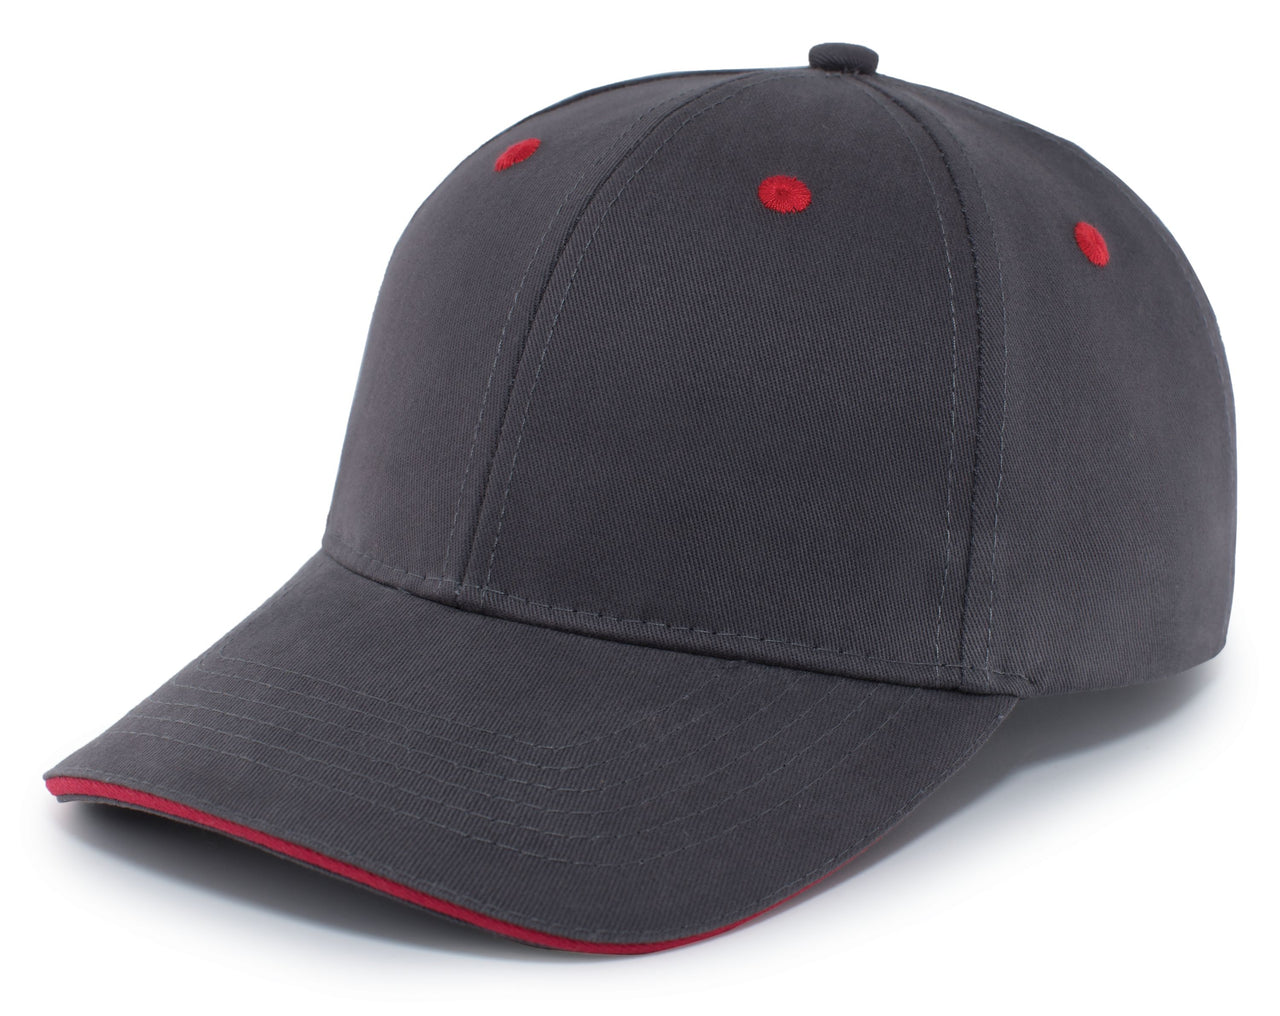 Brushed Twill Cap With Sandwich Bill - 121C